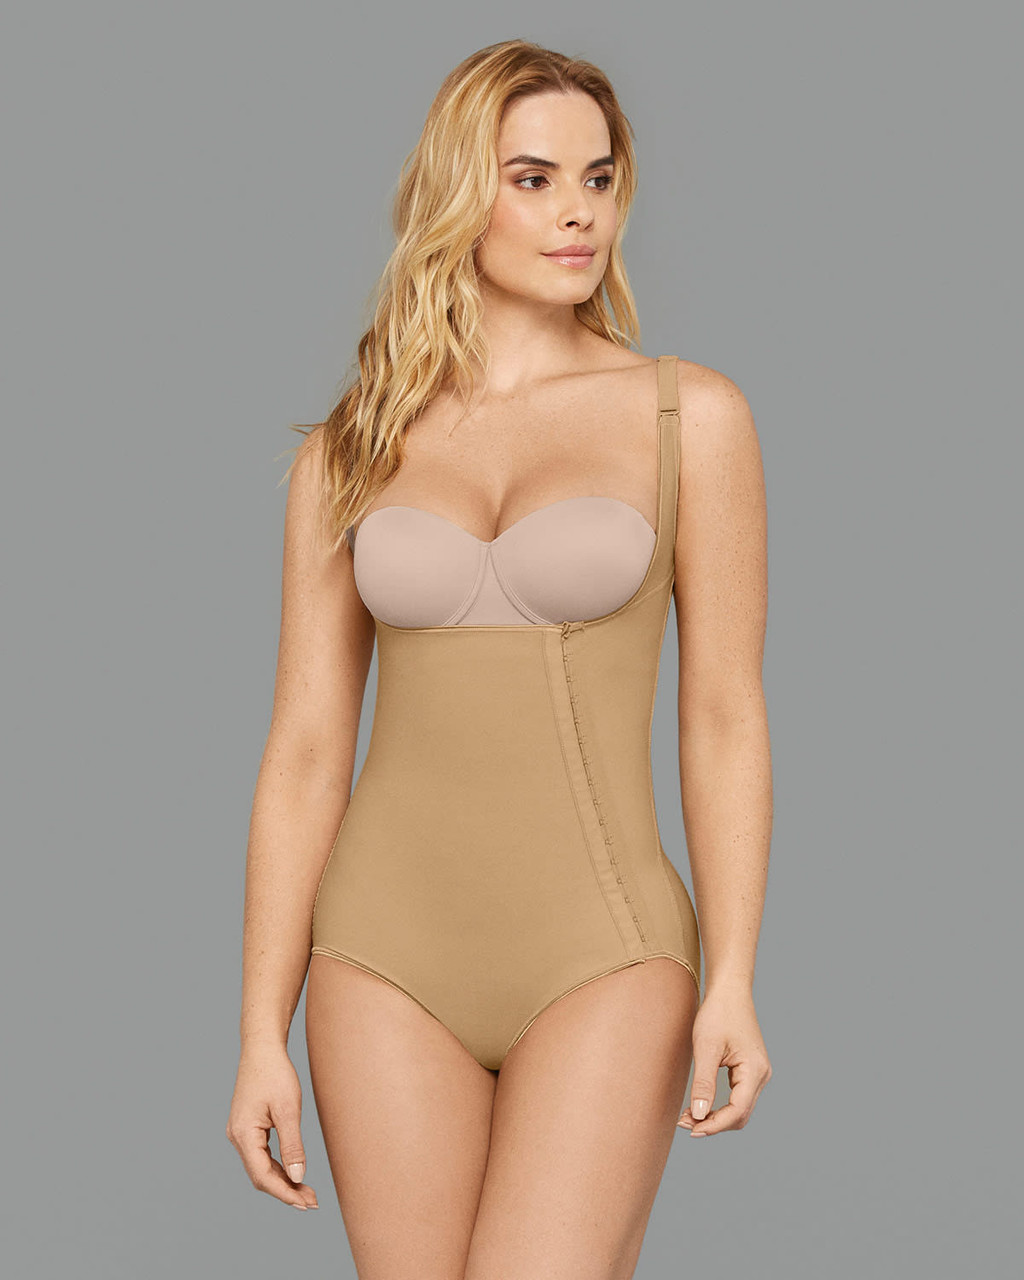 Leonisa Double Take Open Bust Firm Compression Post-Surgical Body Shaper -  Compression Health